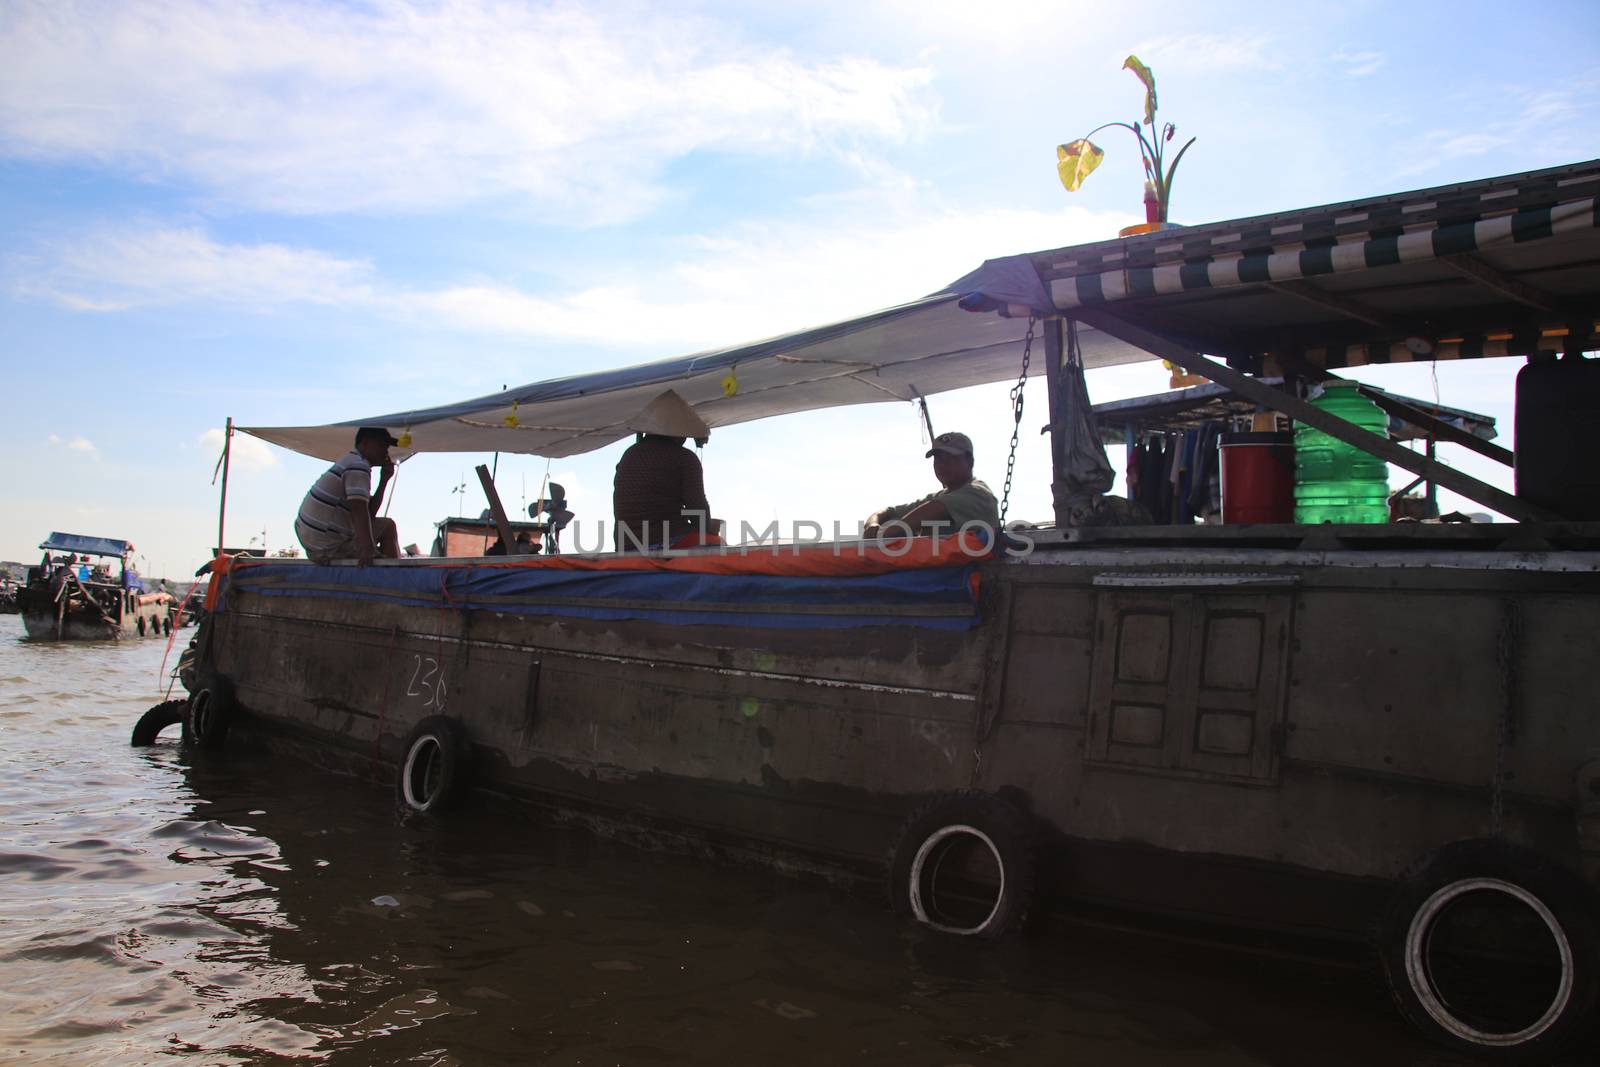 Editorial. Merchant boat in Cai Rang Floating Market by Sonnet15